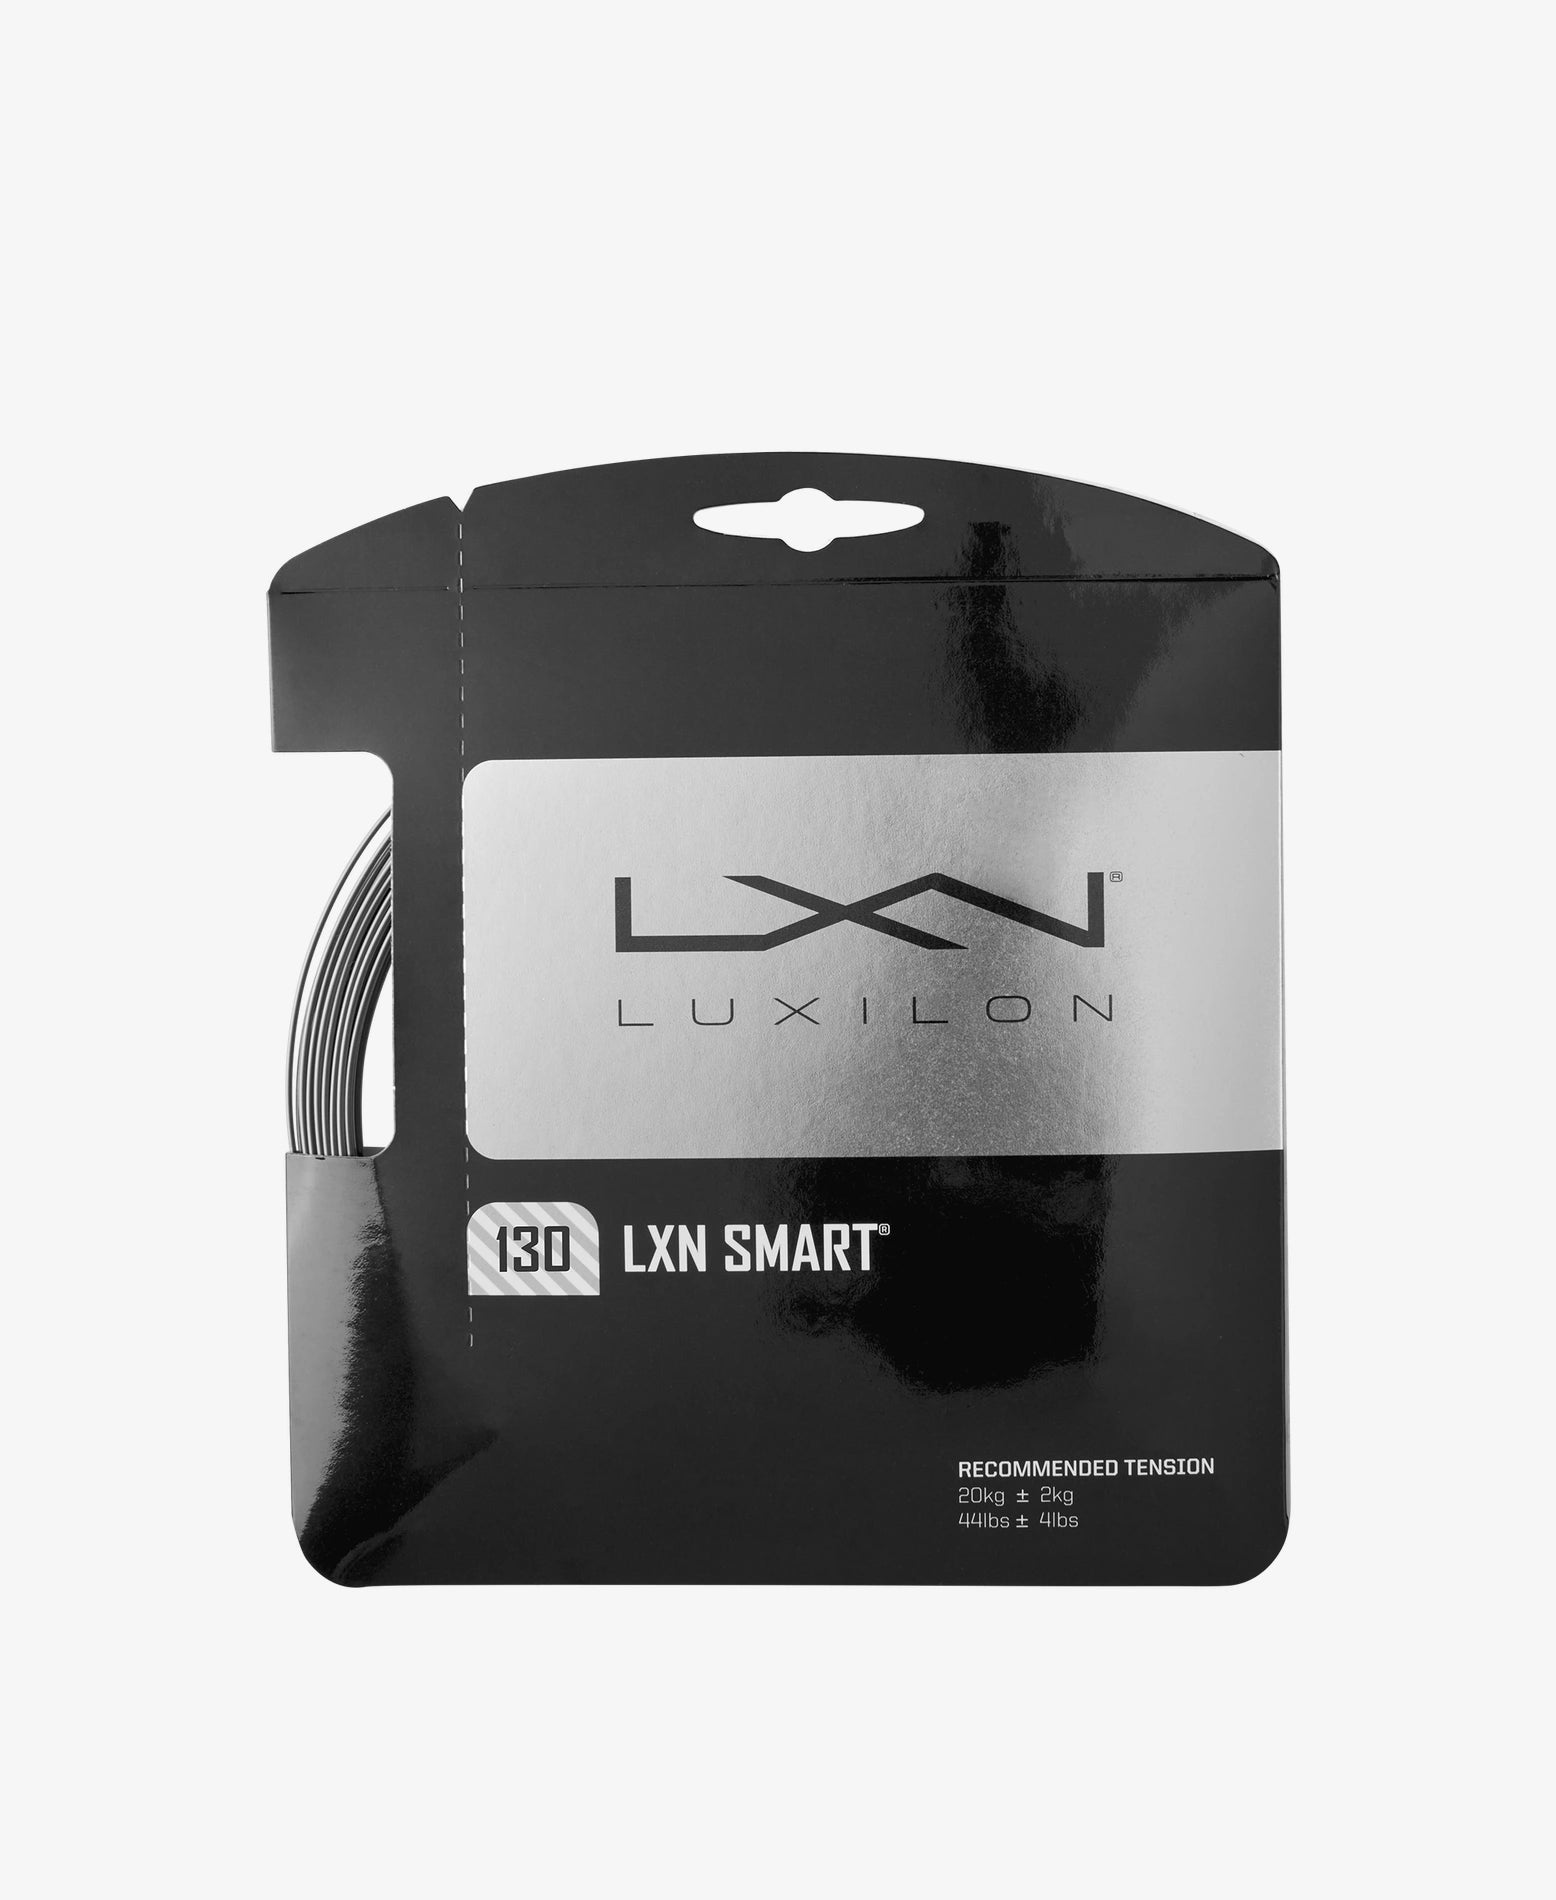 A set of Luxilon Smart 130 Tennis String available for sale at GSM Sports.     